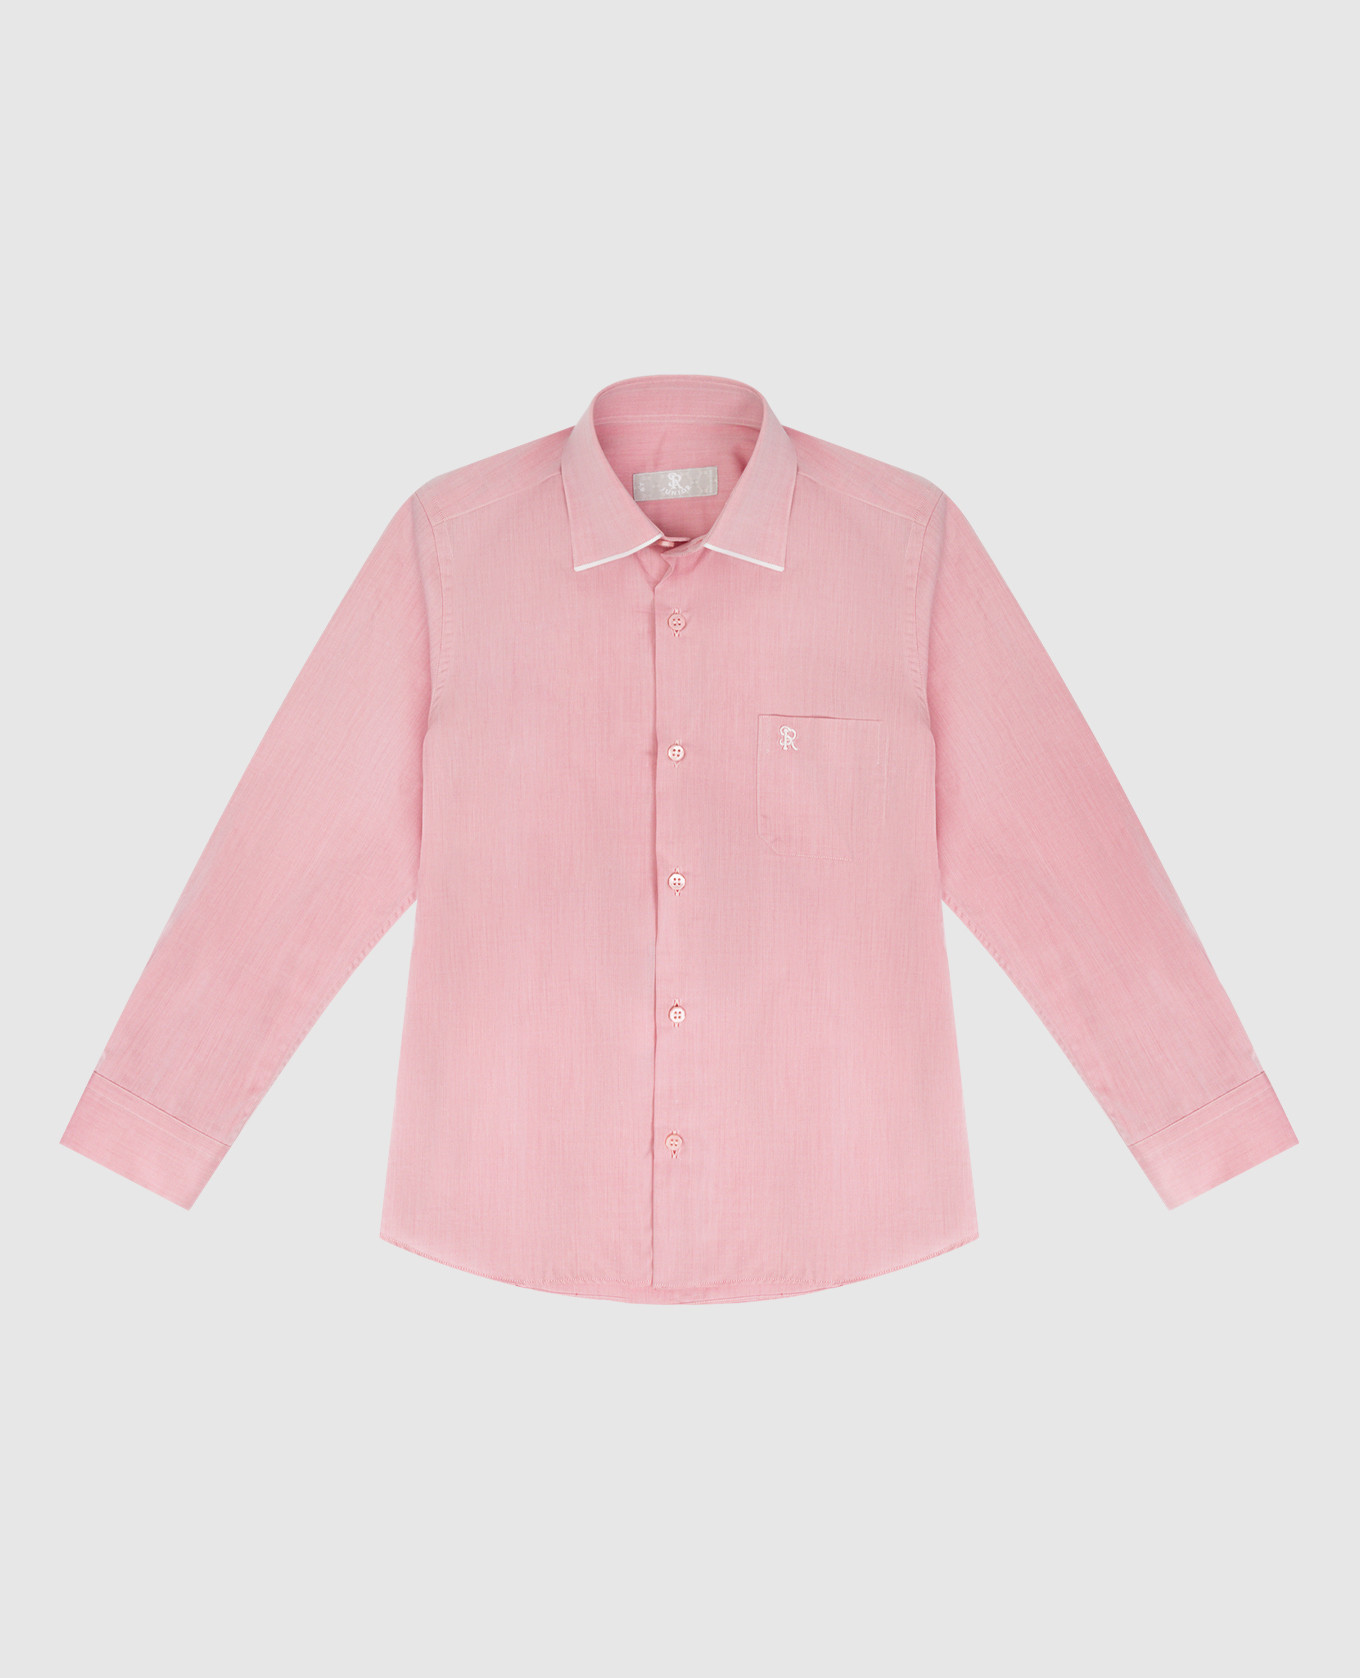 Children's pink shirt with logo embroidery